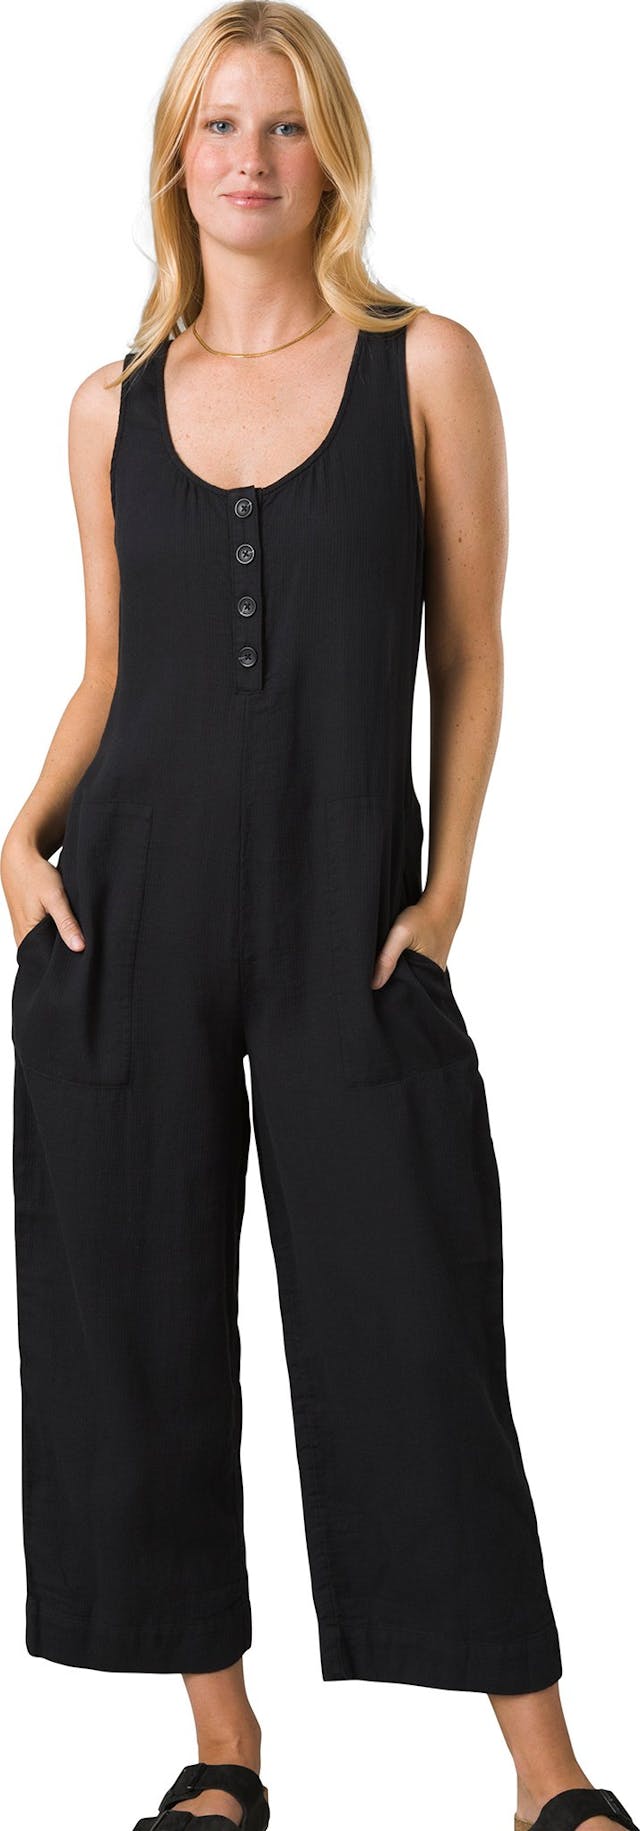 Product image for Seakissed Jumpsuit - Women's